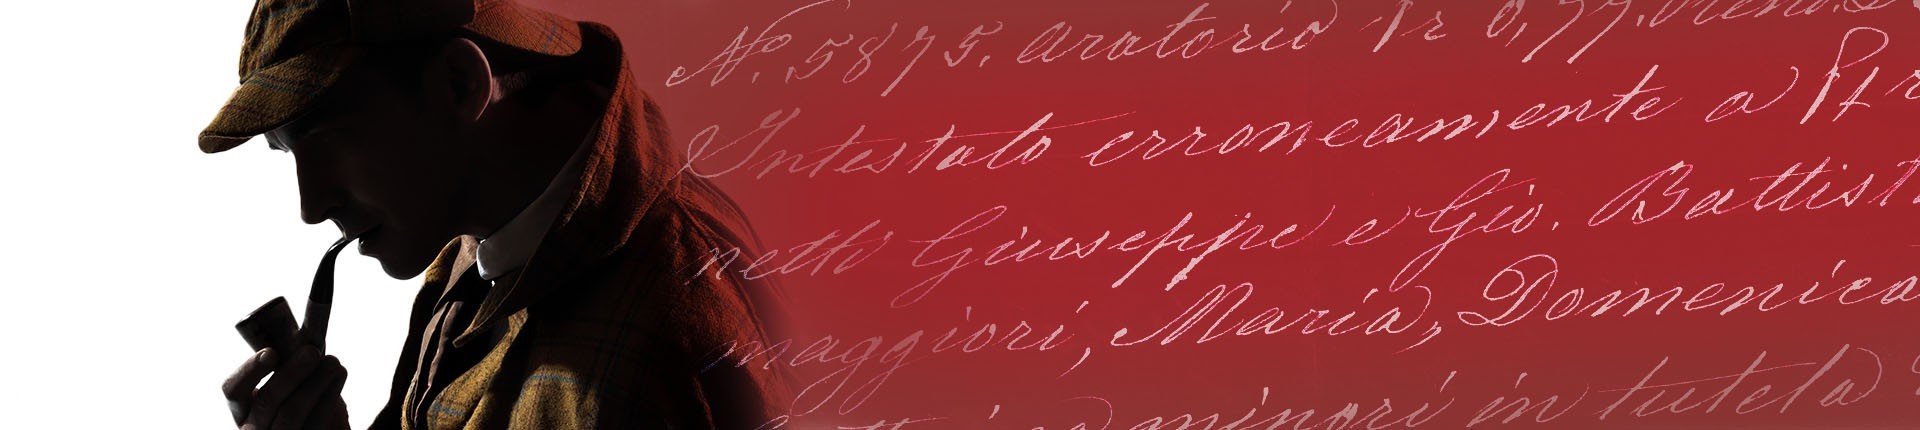 Sherlock Holmes silhouette with handwritten text on red background